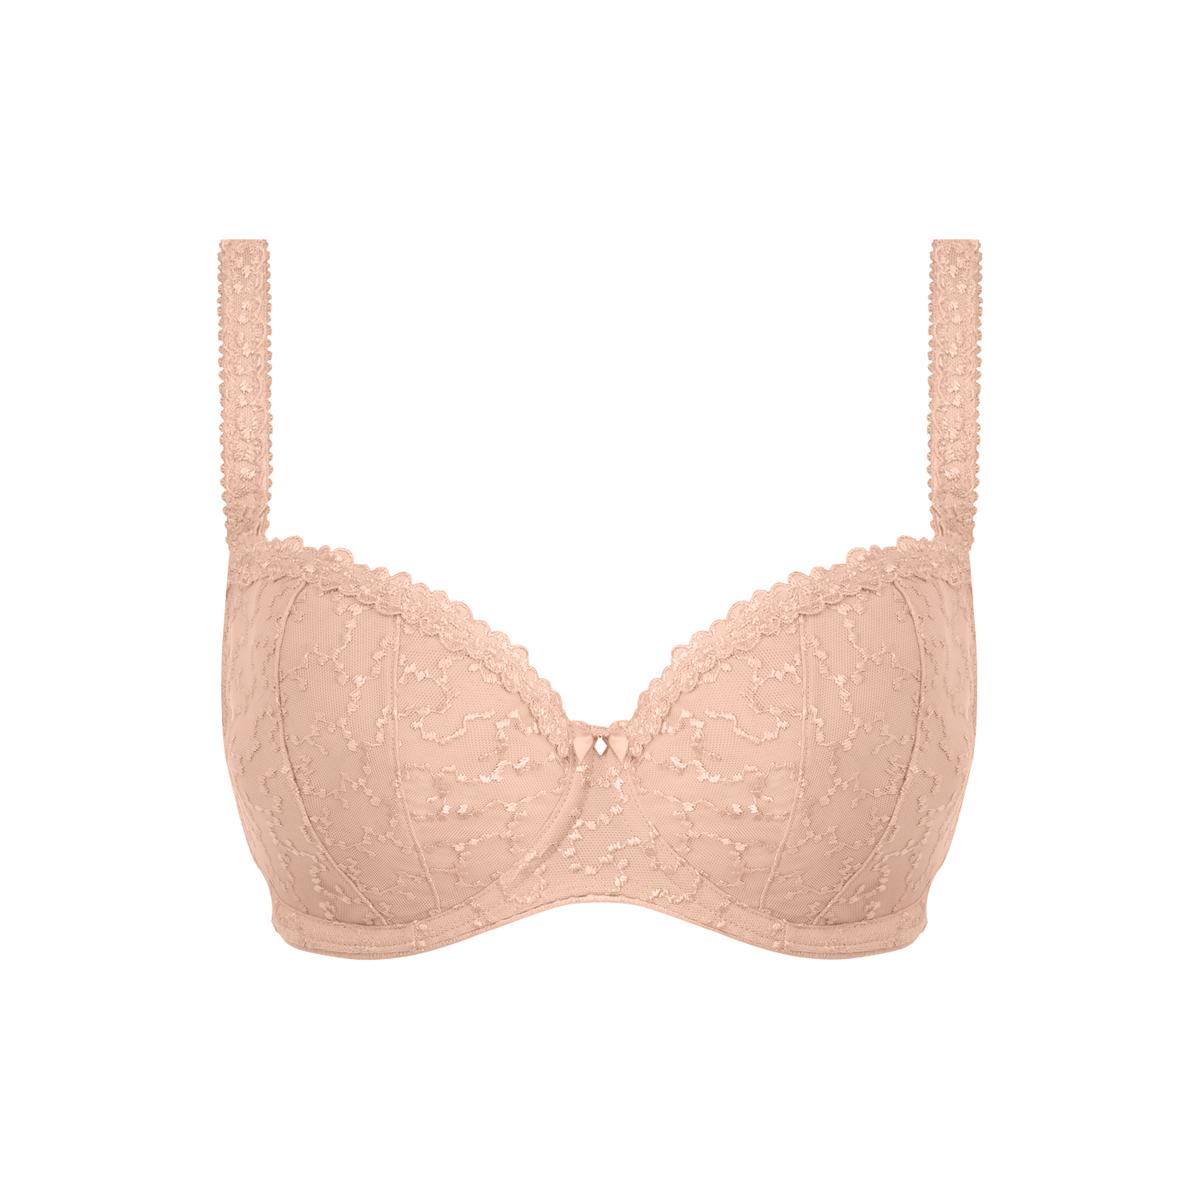 Should I Get A Half-Cup Size? - What Is A Half Cup Bra Size And